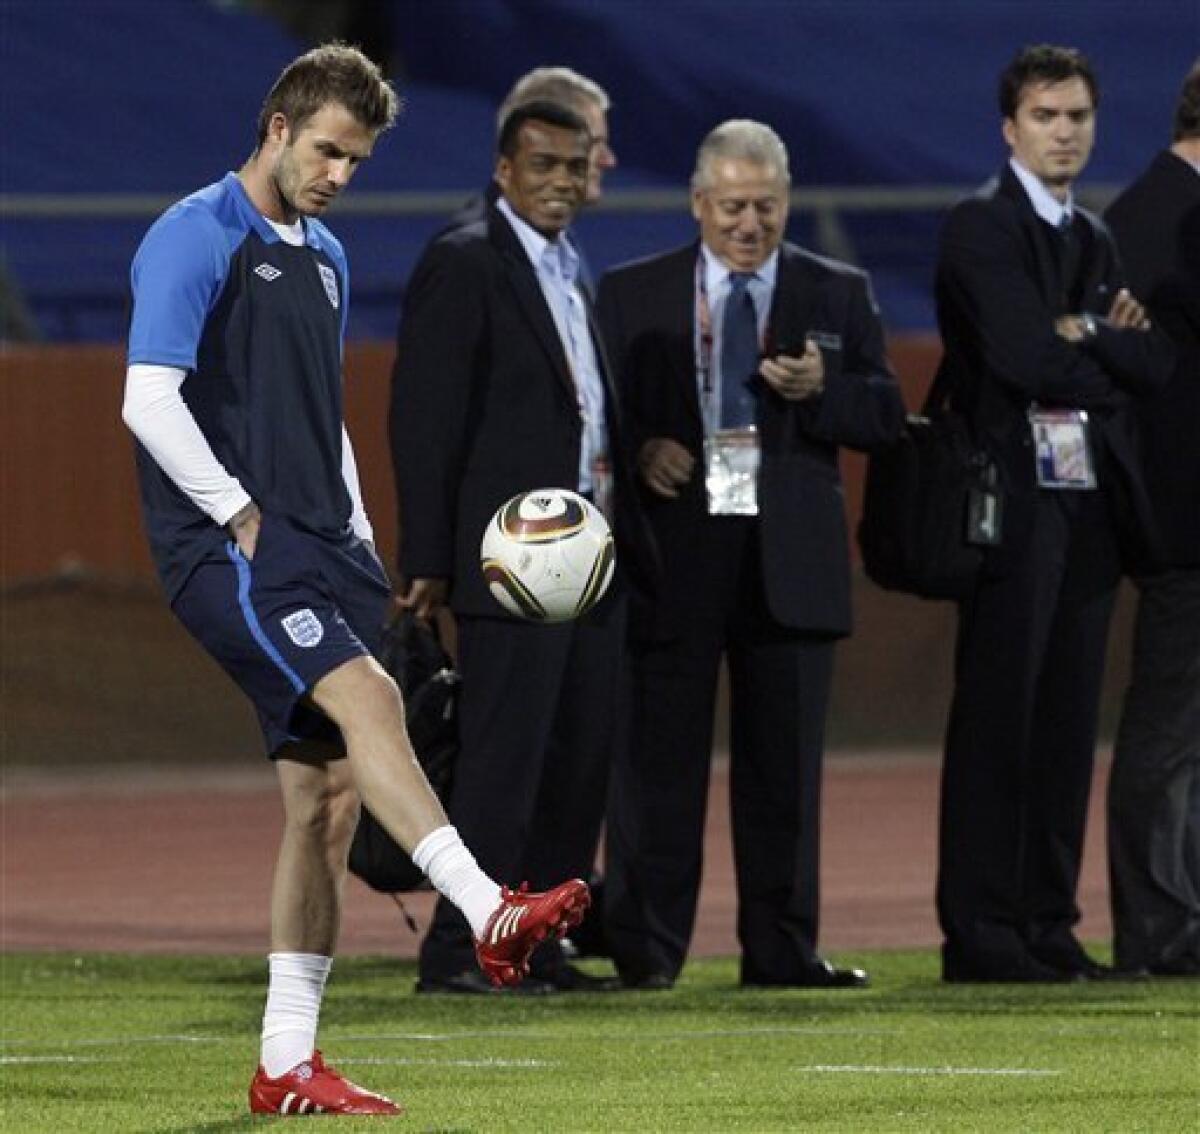 David Beckham kicks a ball on the sidelines as England trains at the Royal Bafokeng Stadium in Rustenburg, South Africa Friday, June 11, 2010. England will play the U.S. in a soccer World Cup Group C match on Saturday. (AP Photo/Elise Amendola)